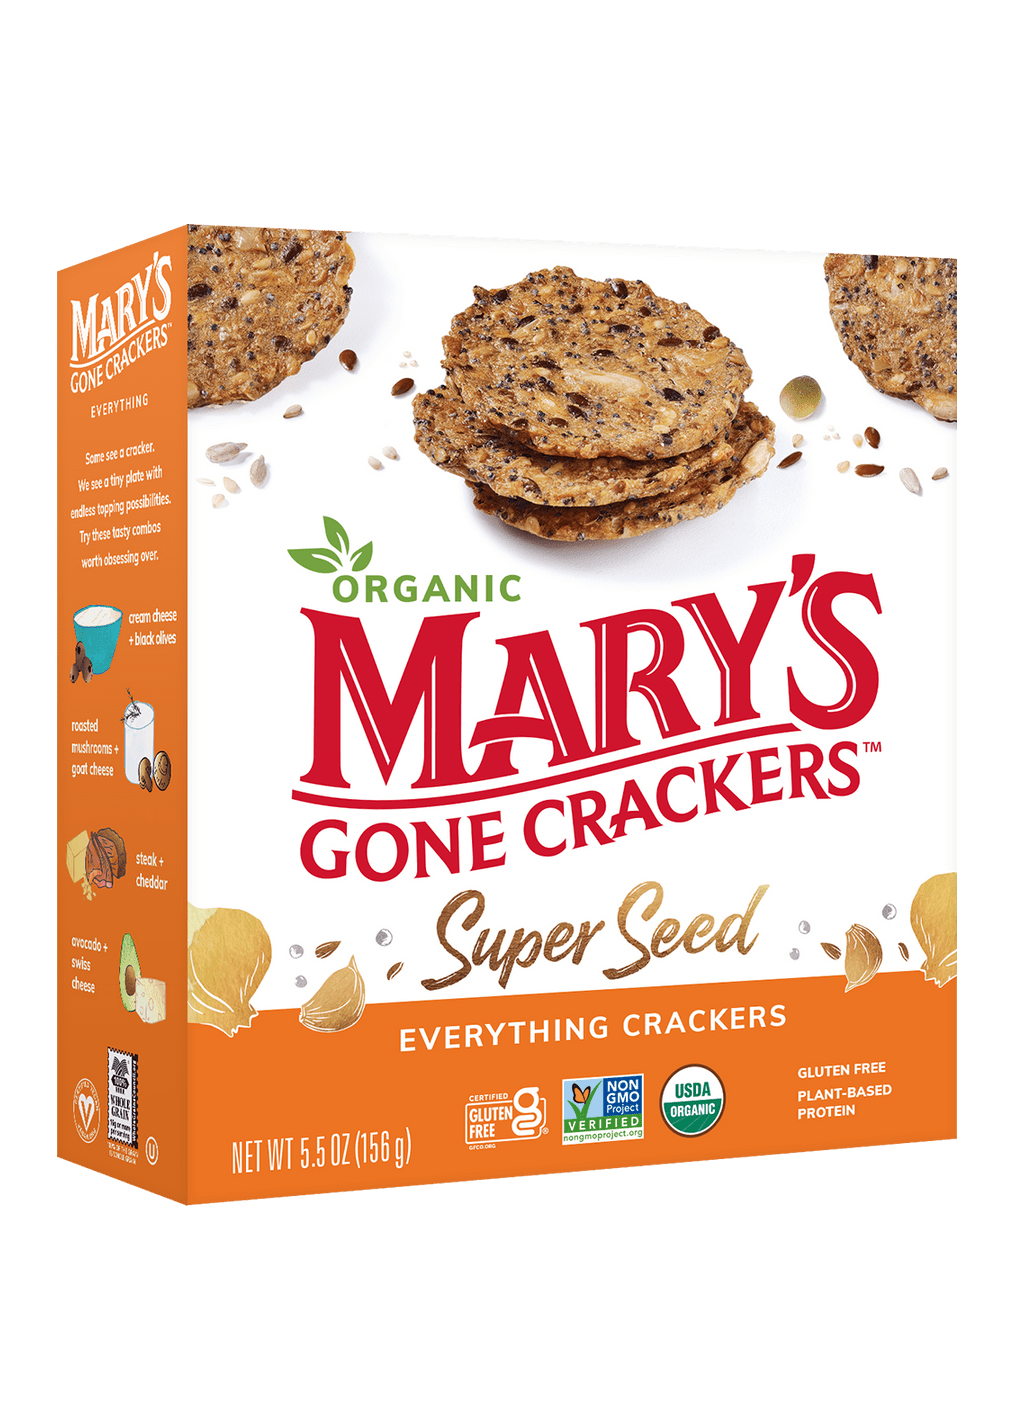 MARY'S GONE CRACKERS Super Seed Everything Crackers